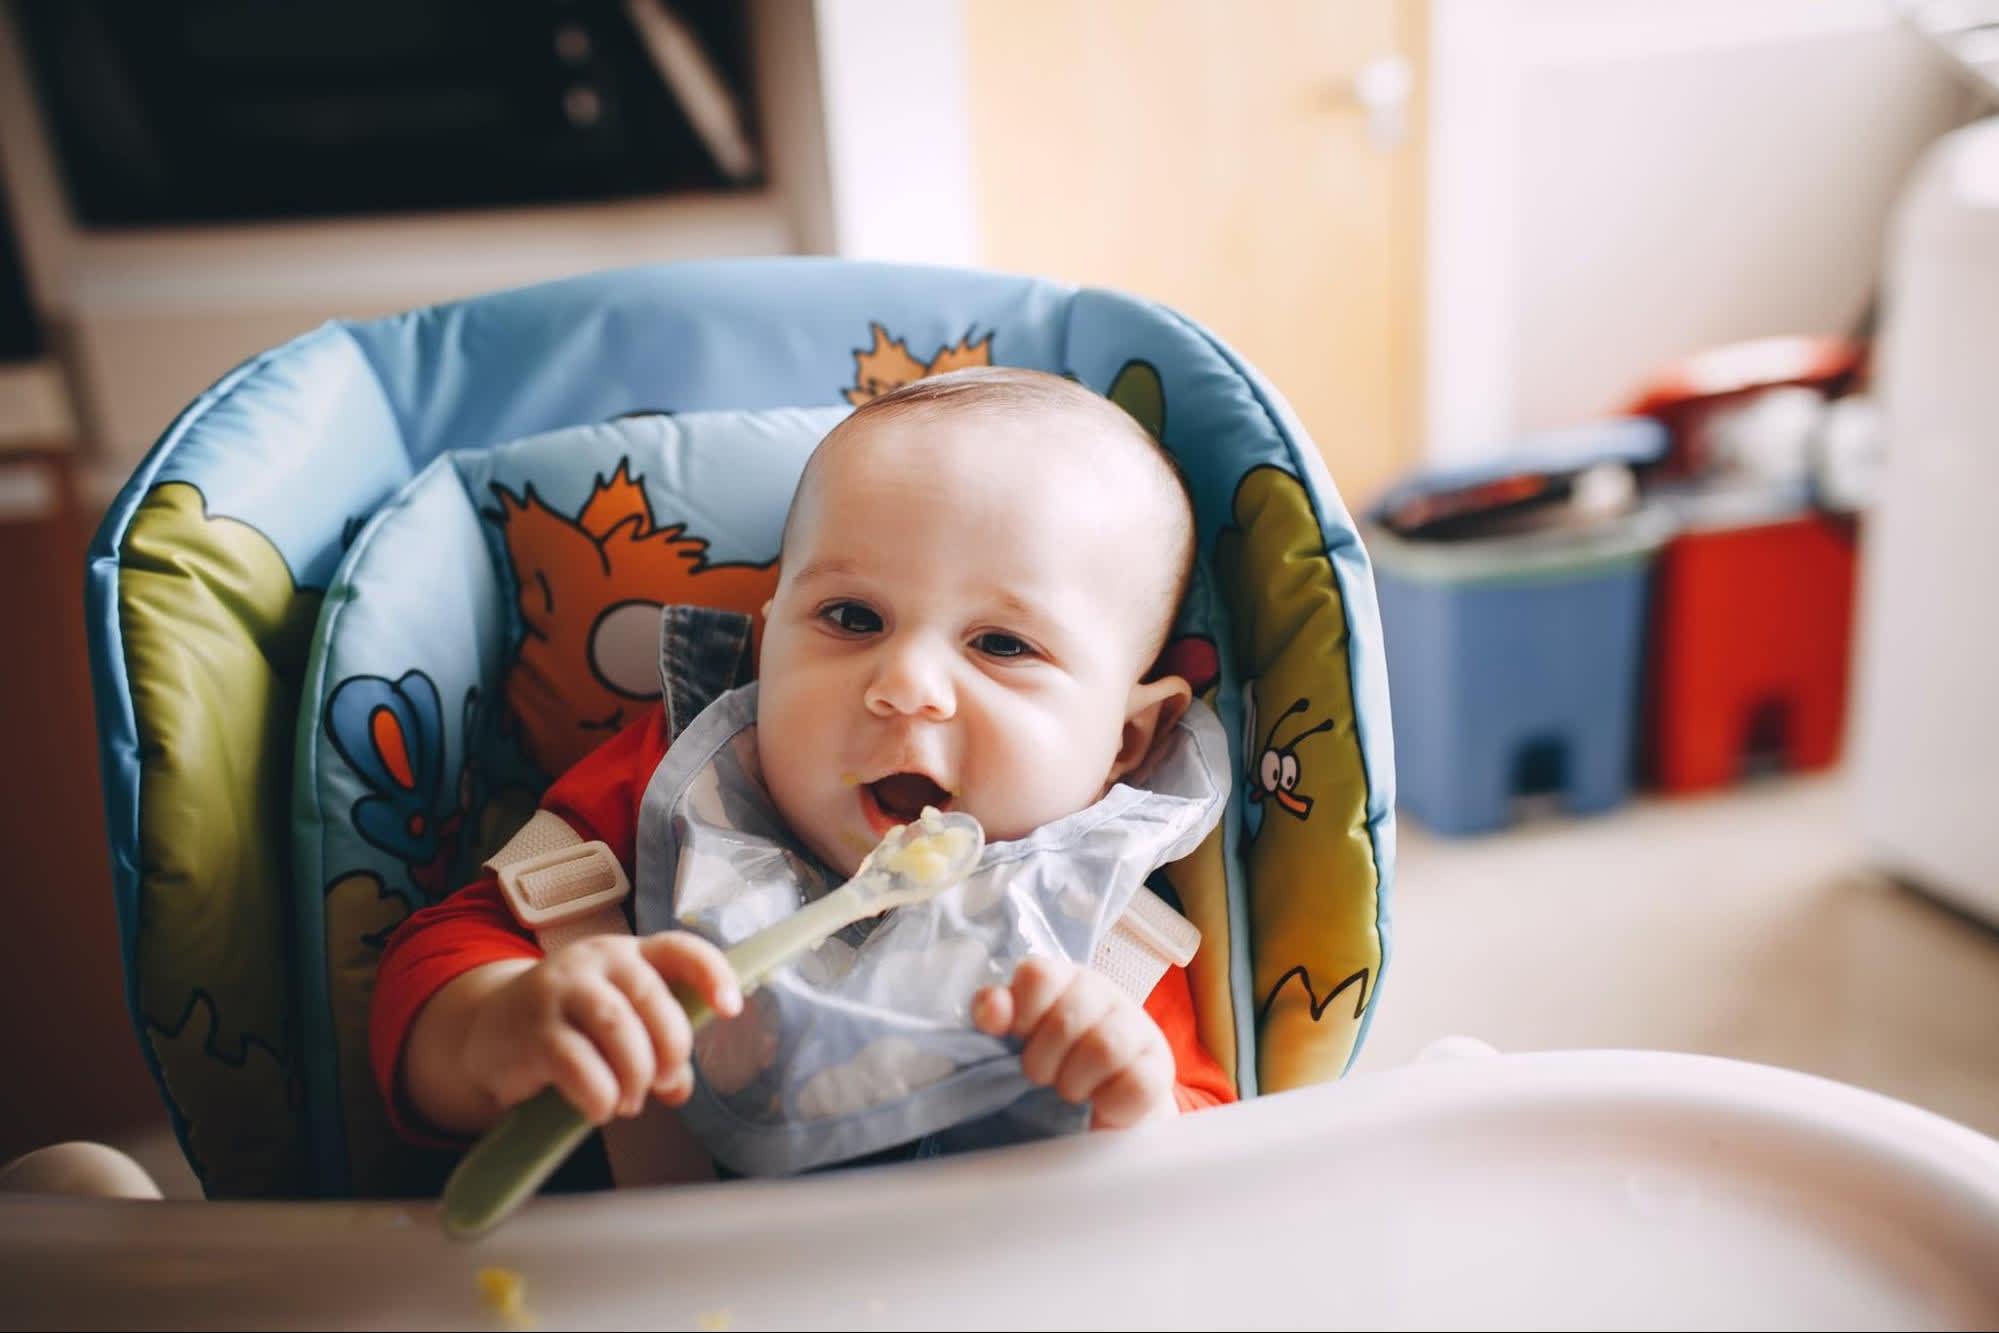 Baby Food Guide: When to Start, What to Feed & More